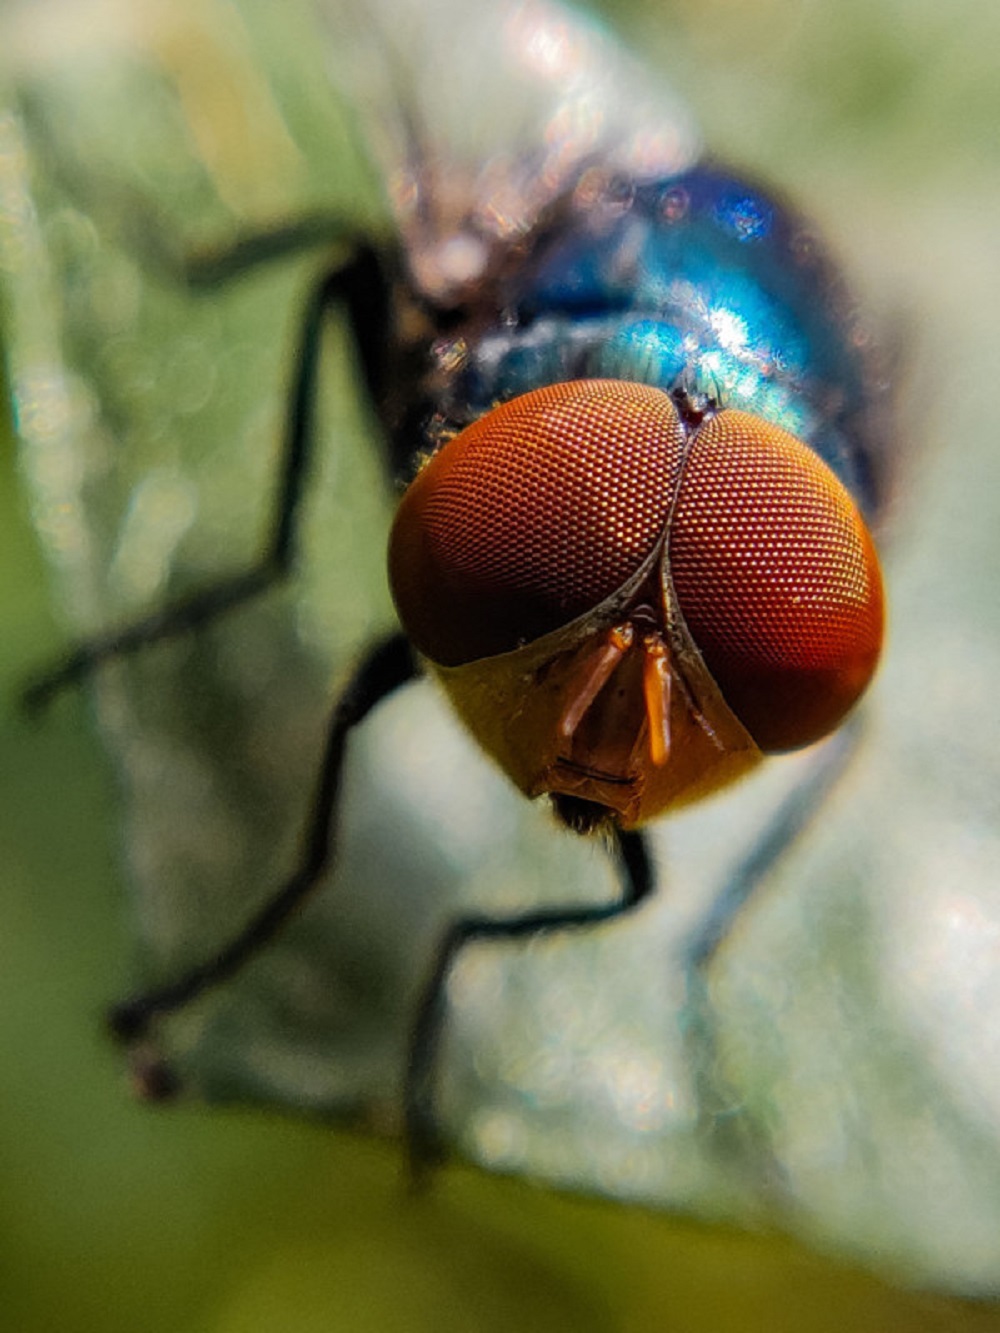 A blow fly in the dust